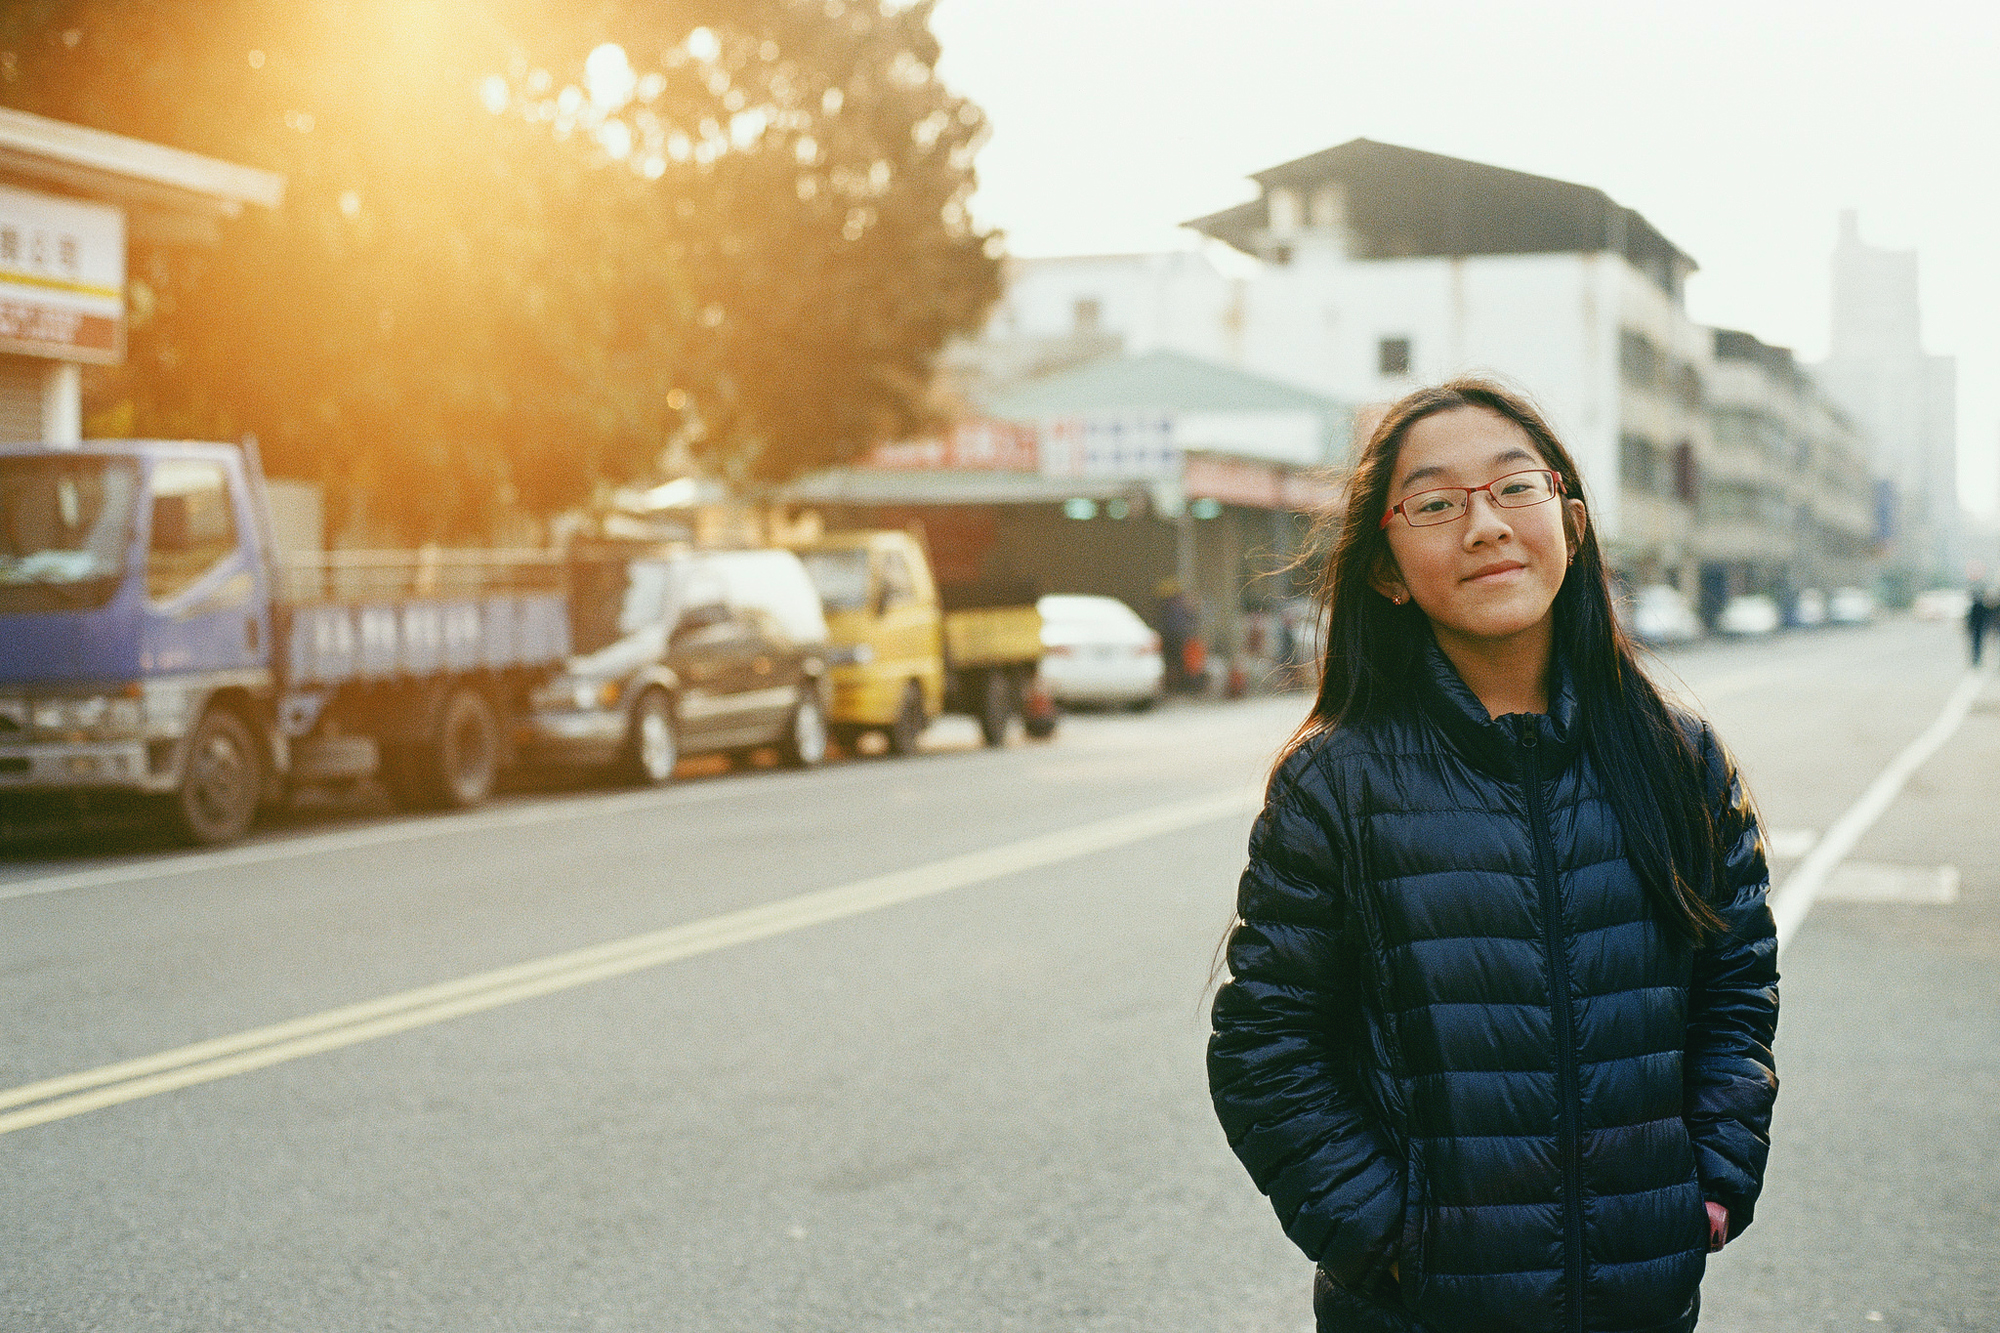 Sunset walk with my daughter through the streets of Taichung - authentic skin tone [Portra 160 |Nikon fm3a]